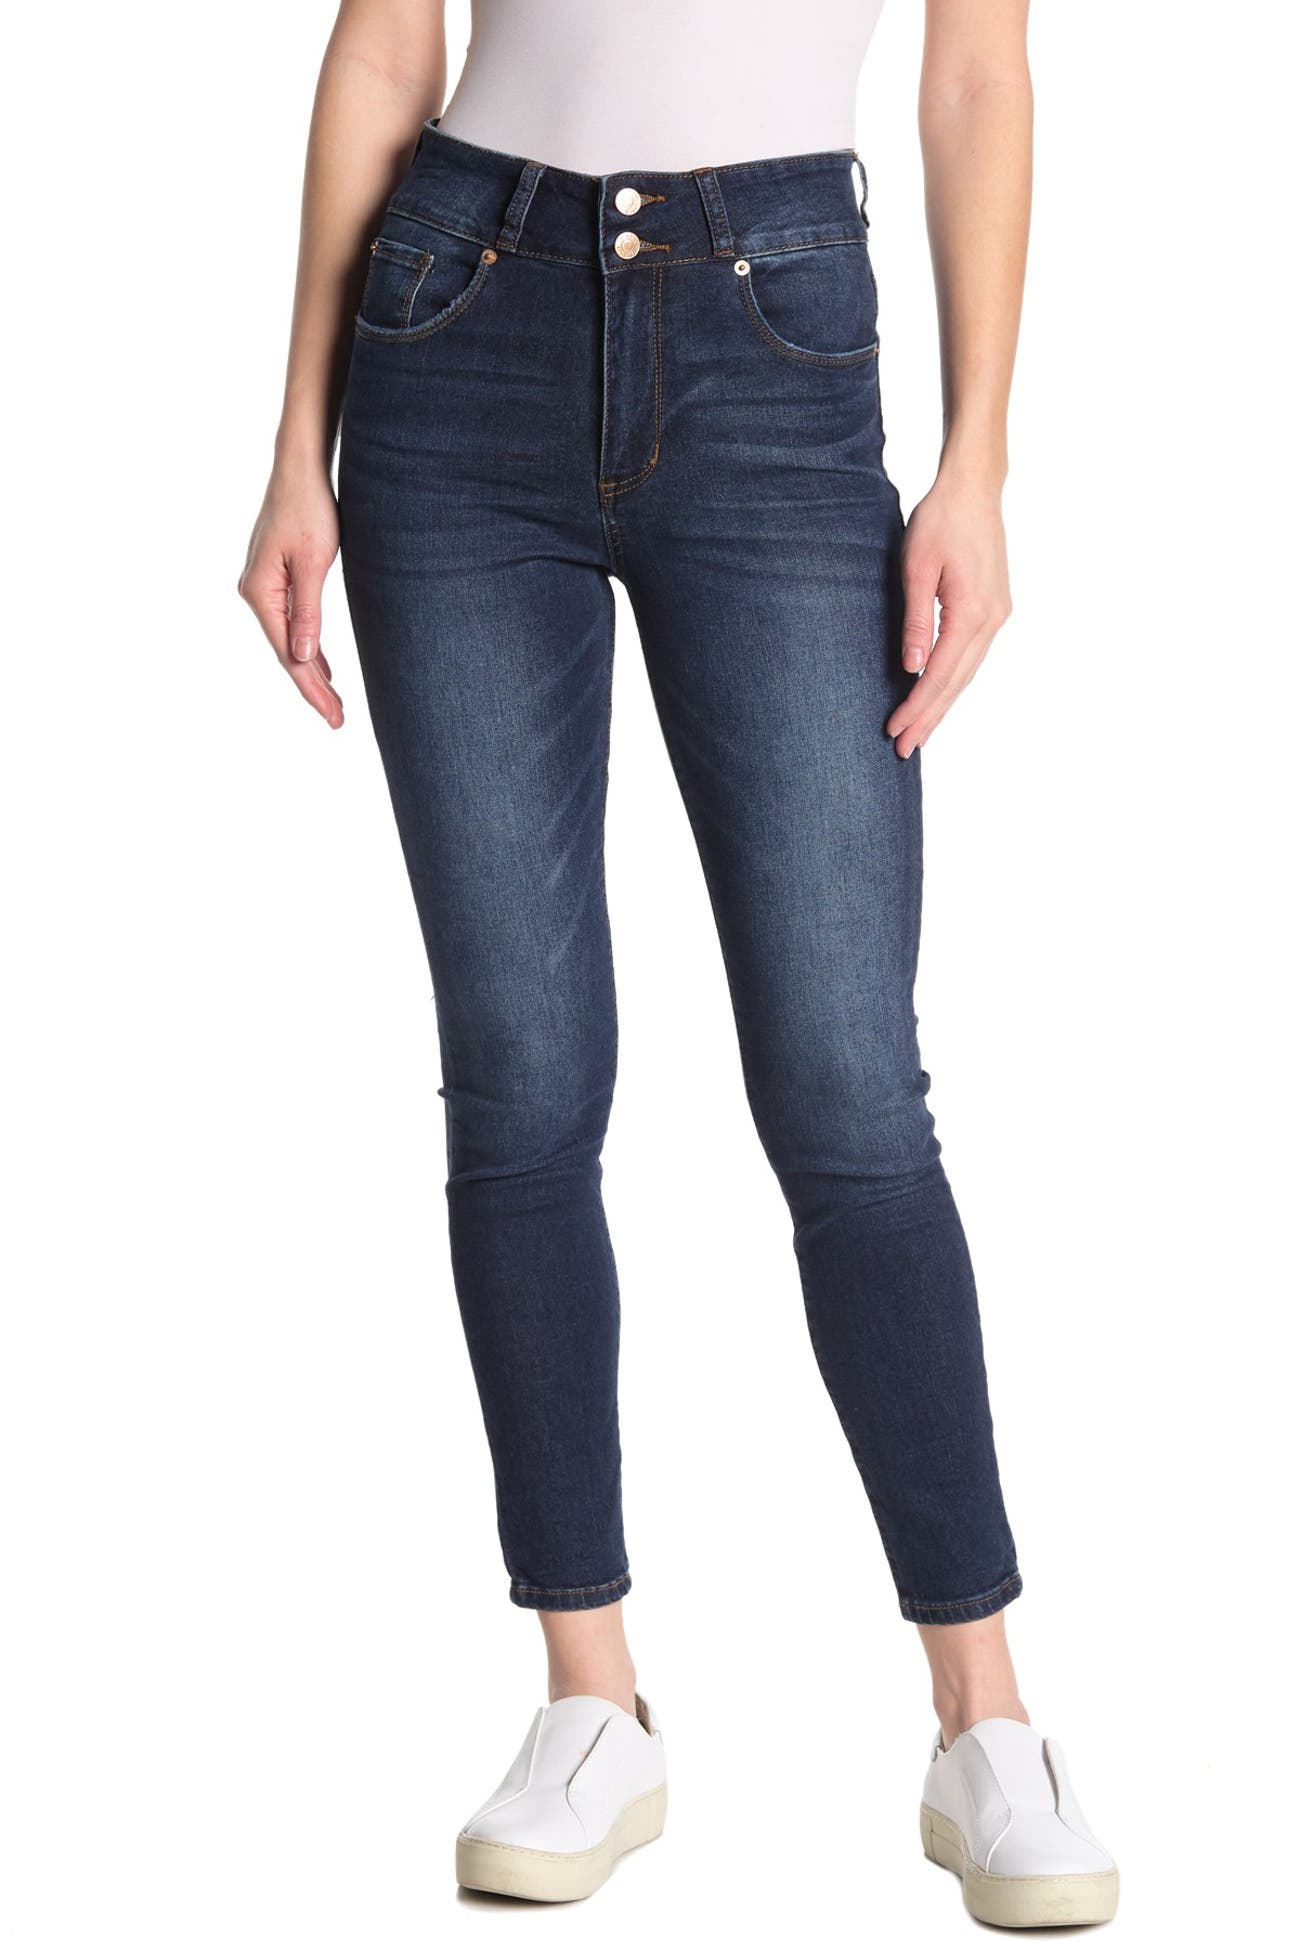 STS BLUE | Brie High Rise Ankle Skinny Jeans | Nordstrom Rack